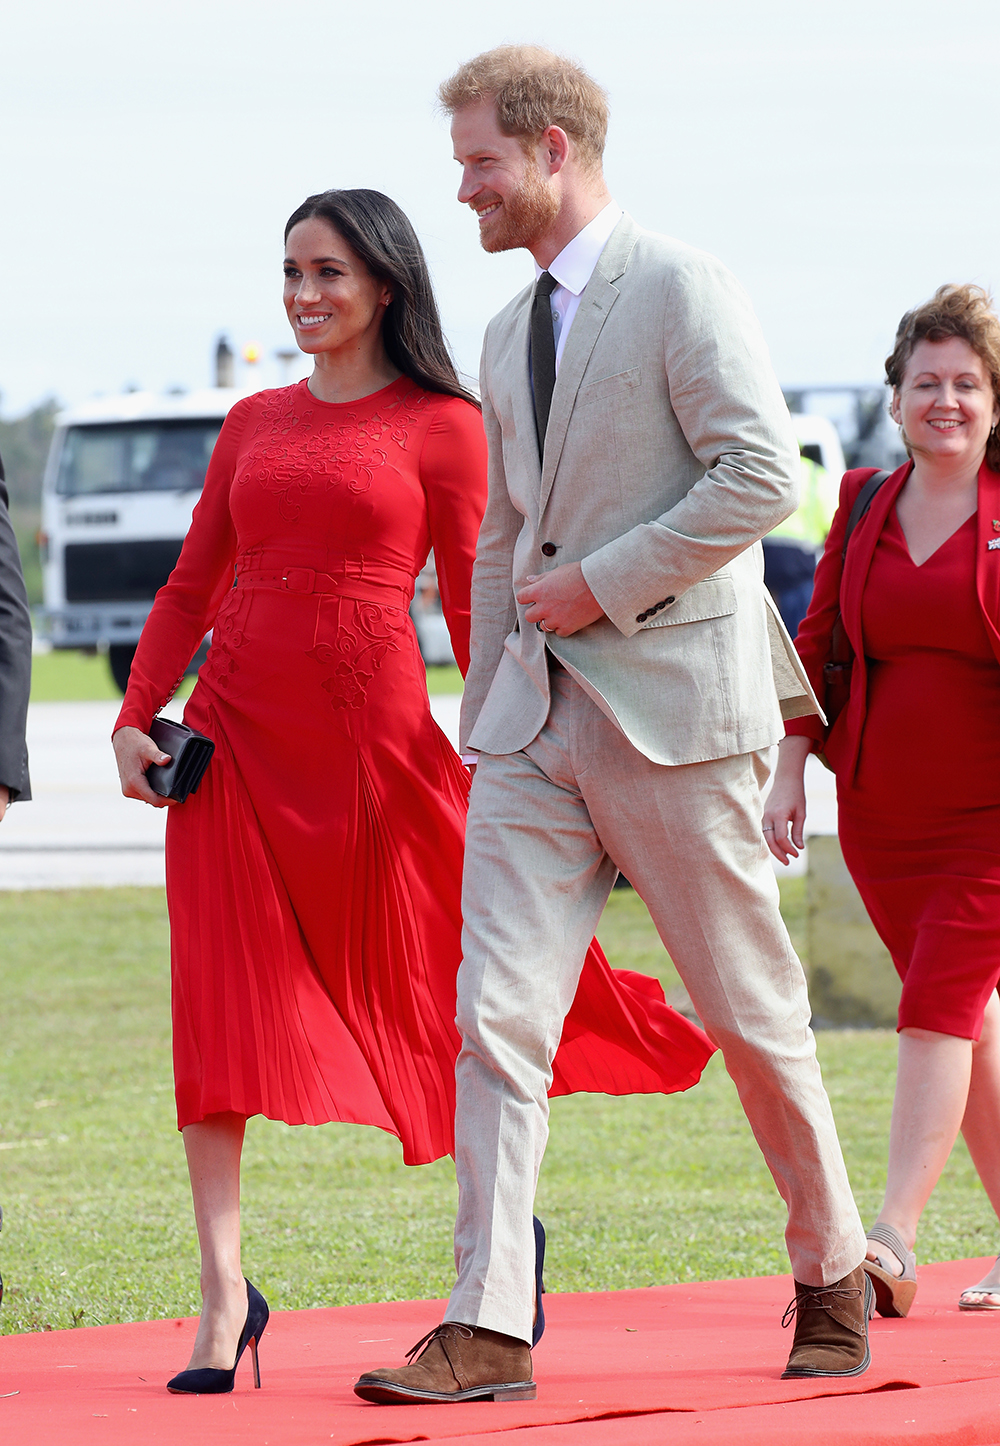 NUKU'ALOFA, TONGA - OCTOBER 25: Prince Harry, Duke of Sussex and Meghan, Duchess of Sussex arrive at Fua'amotu Airport on October 25, 2018 in Nuku'alofa, Tonga. The Duke and Duchess of Sussex are on their official 16-day Autumn tour visiting cities in Australia, Fiji, Tonga and New Zealand. (Photo by Chris Jackson/Getty Images)